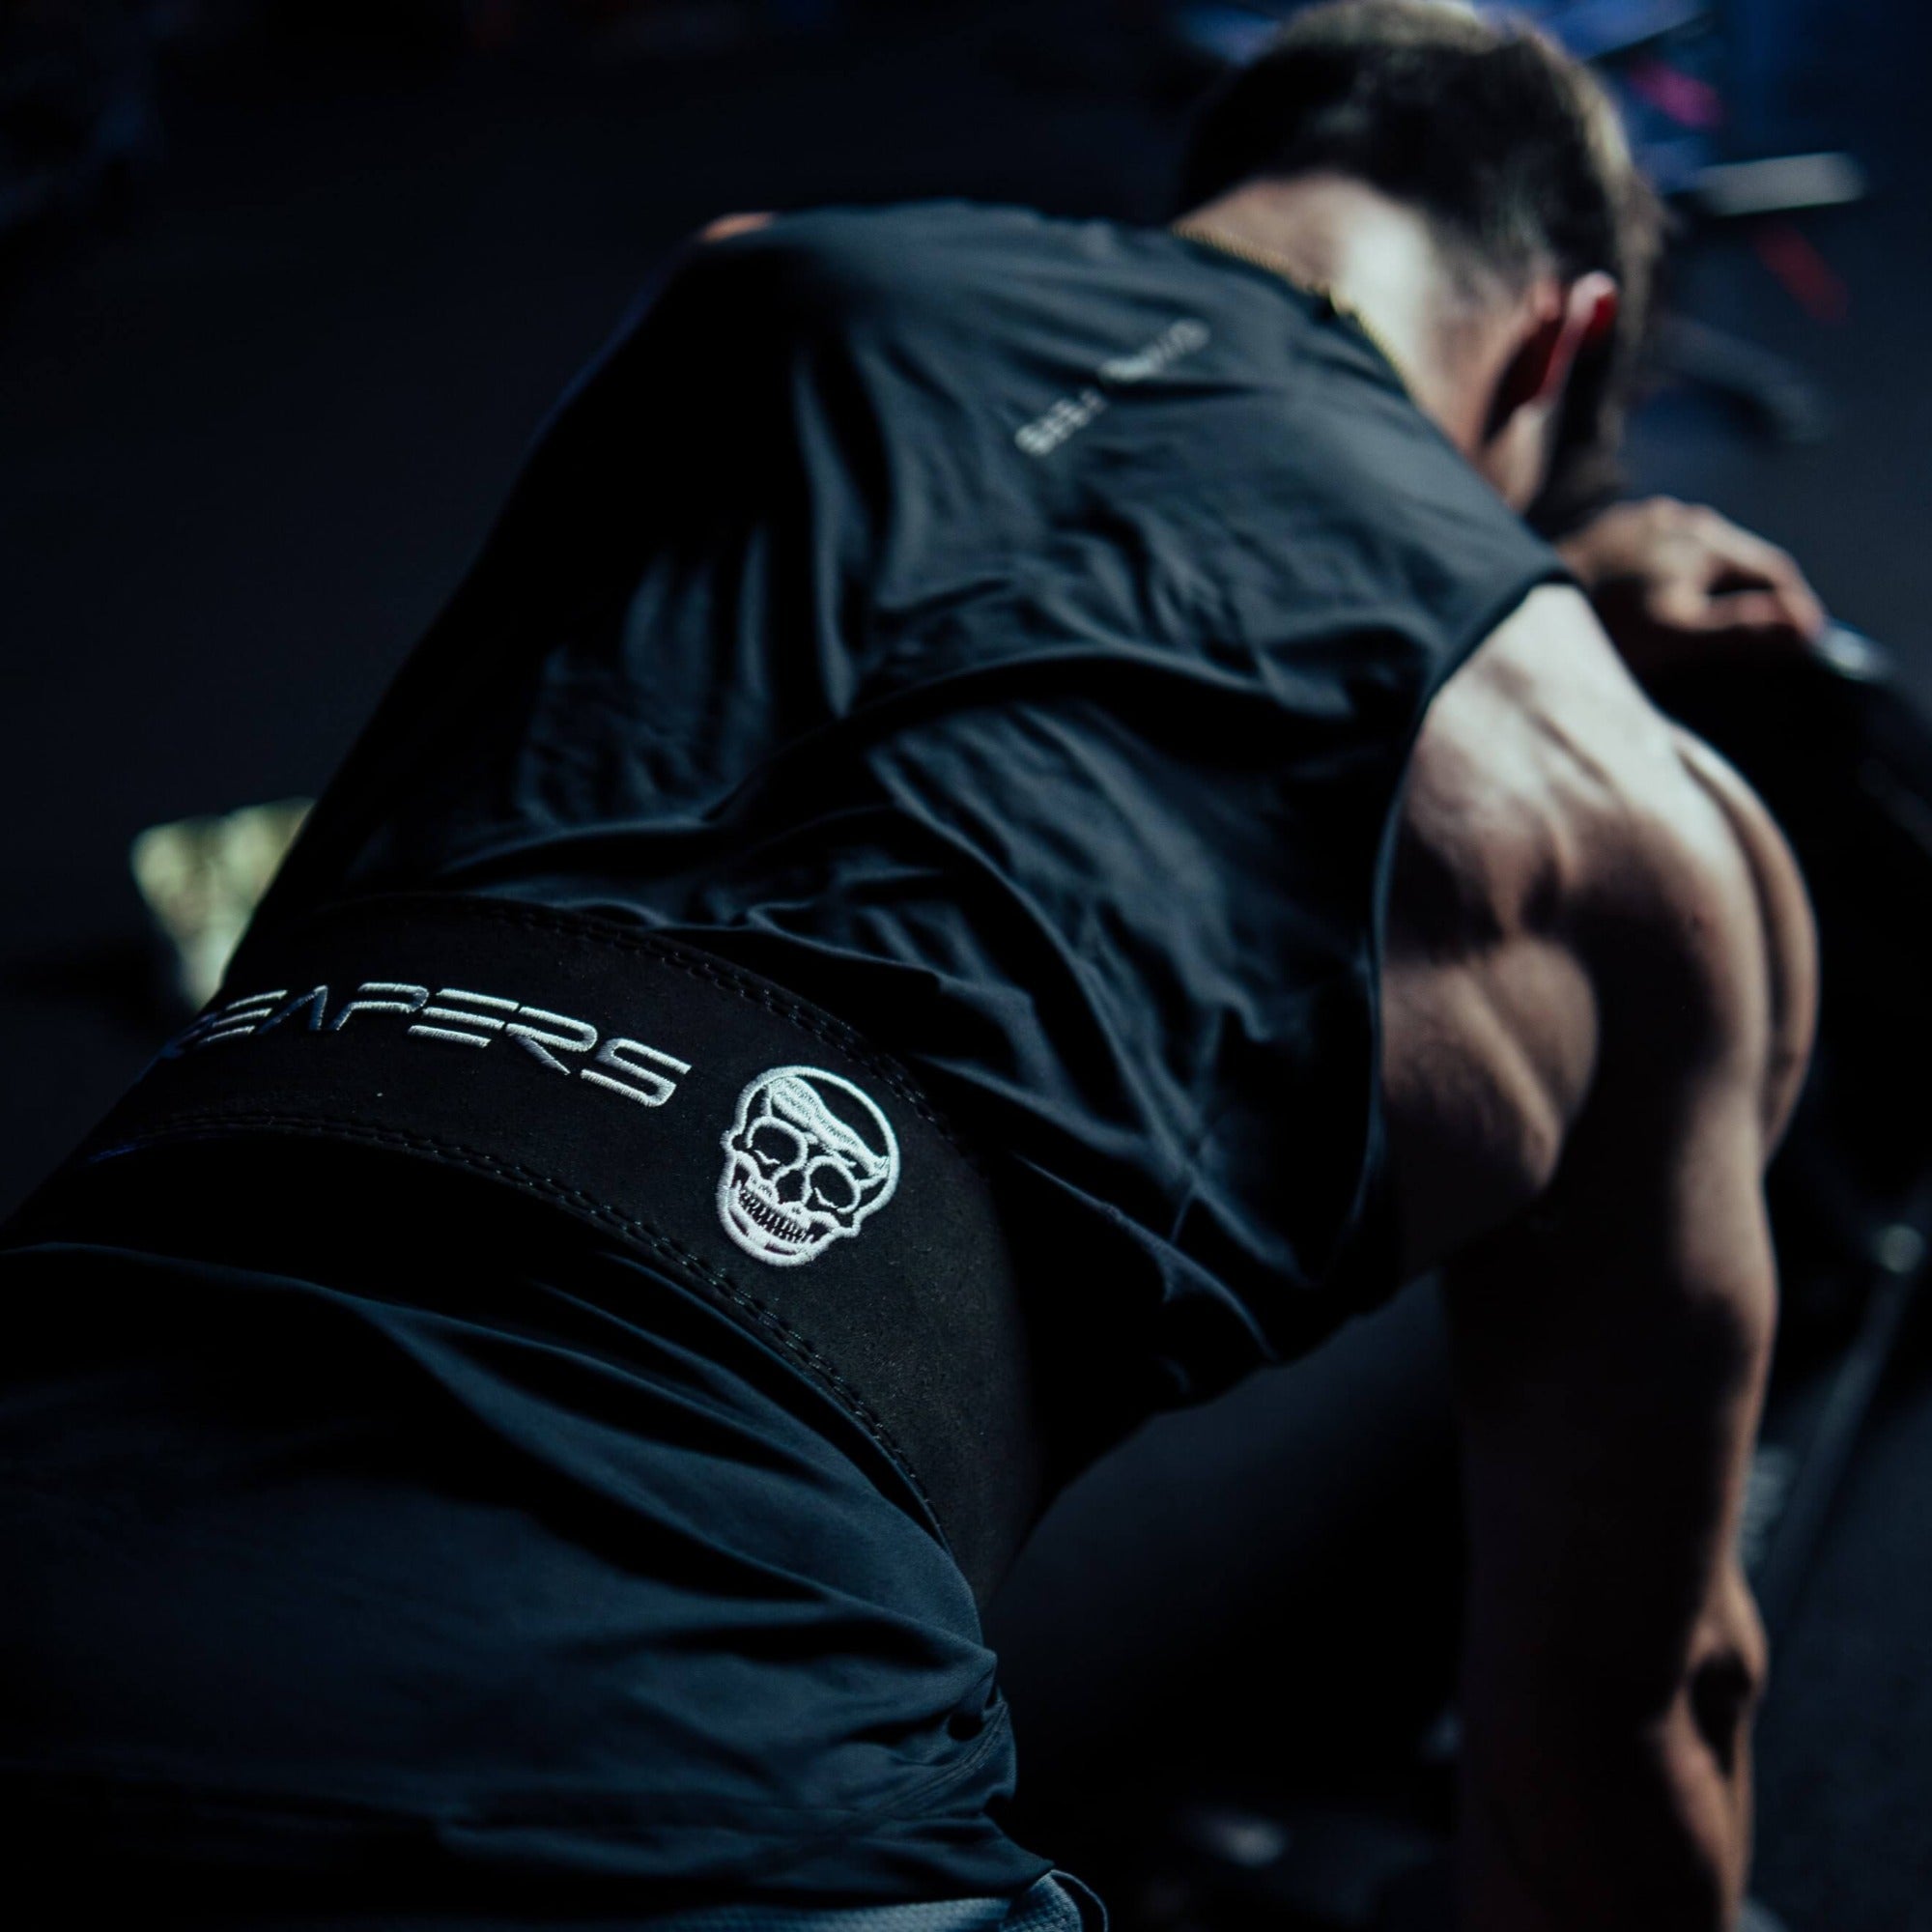 bent over rows with back of black white lever belt in use showing off logo